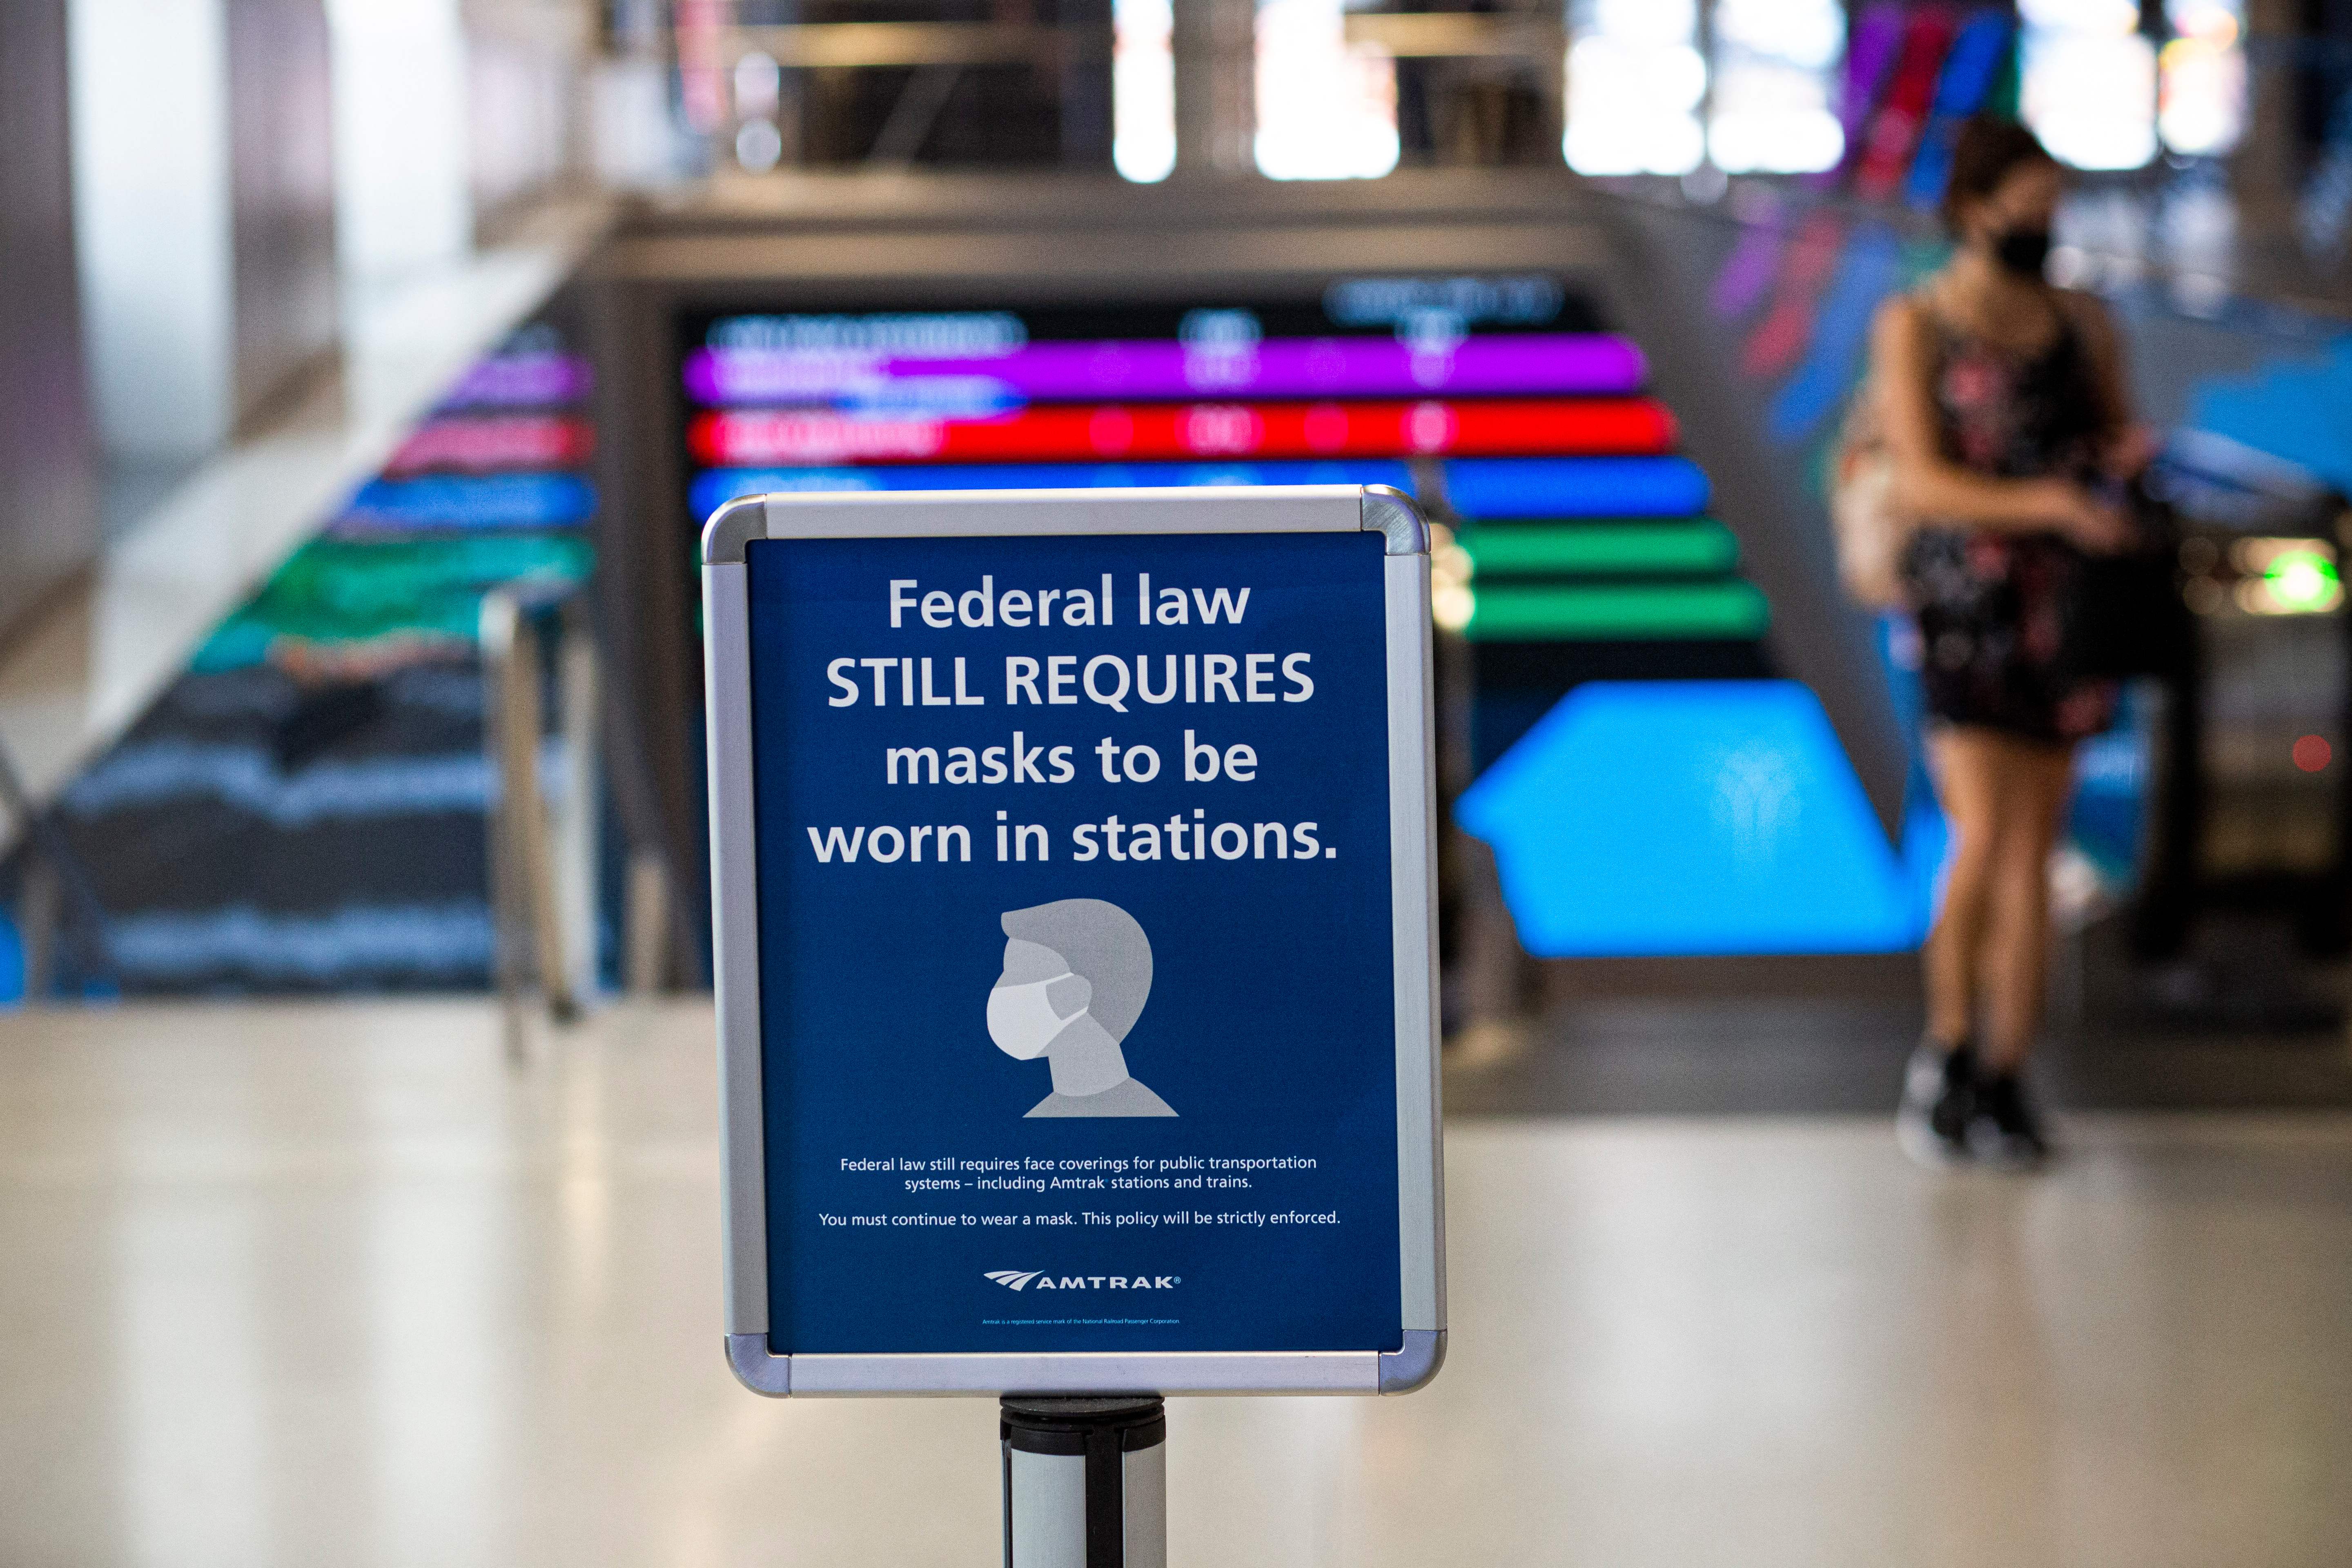 A woman in Penn Station walks past a sign that reads, “Federal law still requires masks to be worn in stations.”